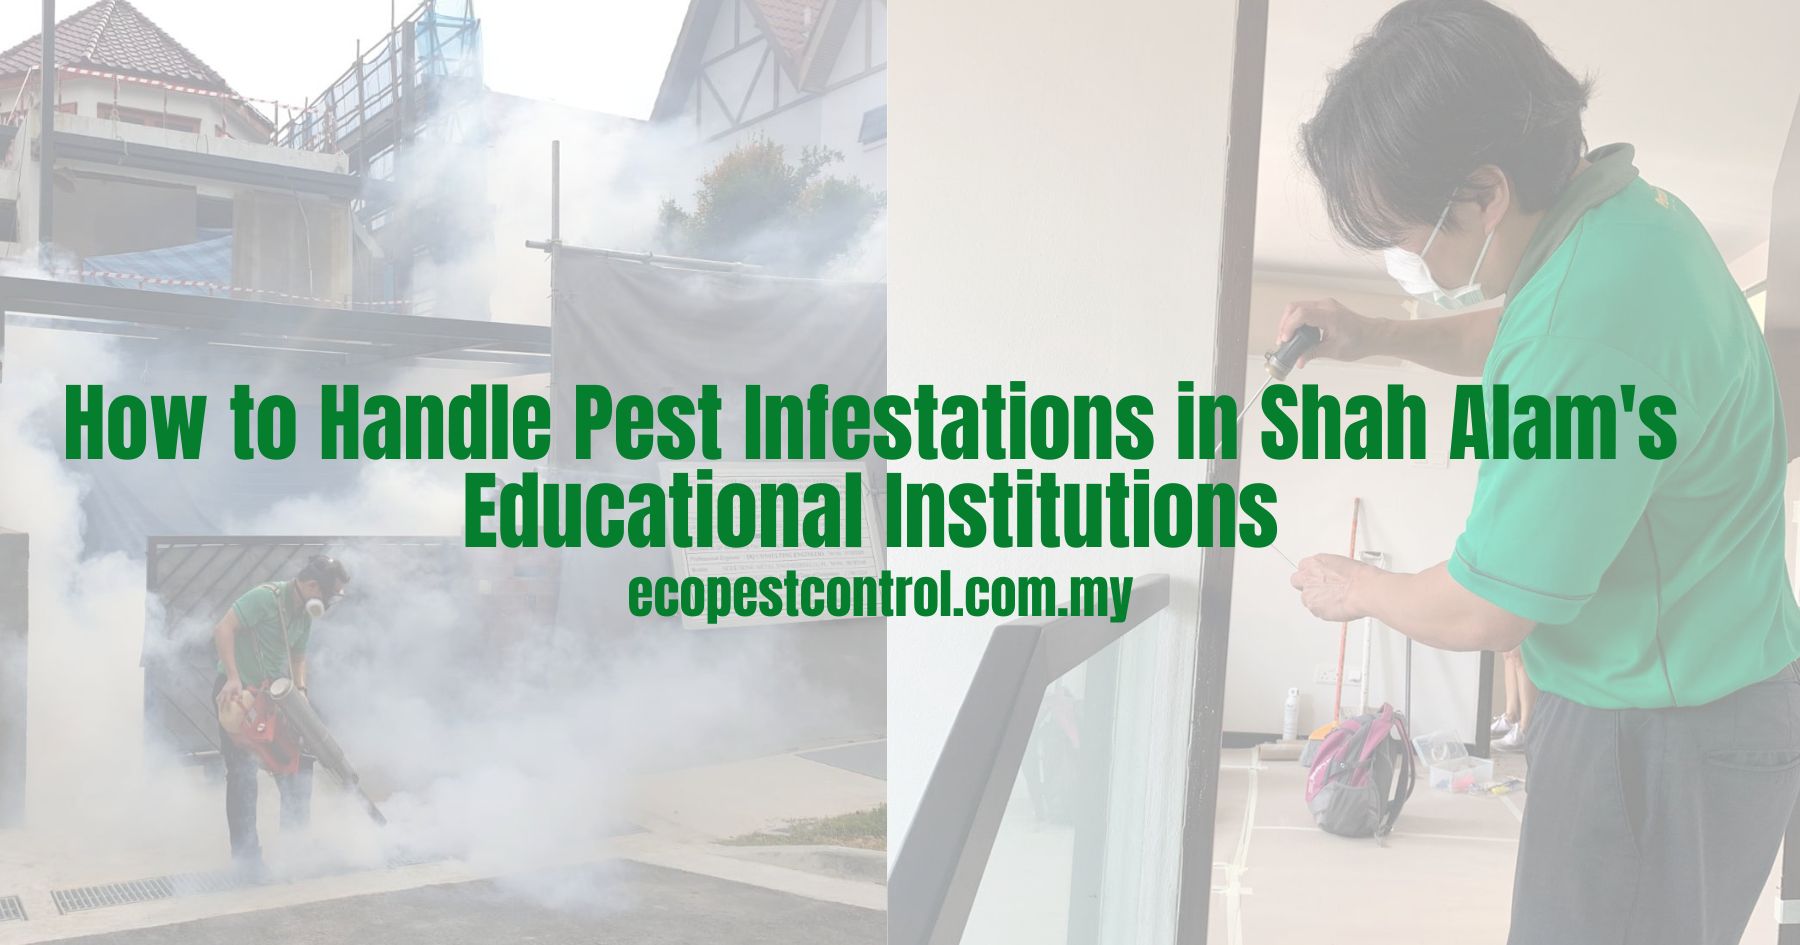 How to Handle Pest Infestations in Shah Alam's Educational Institutions